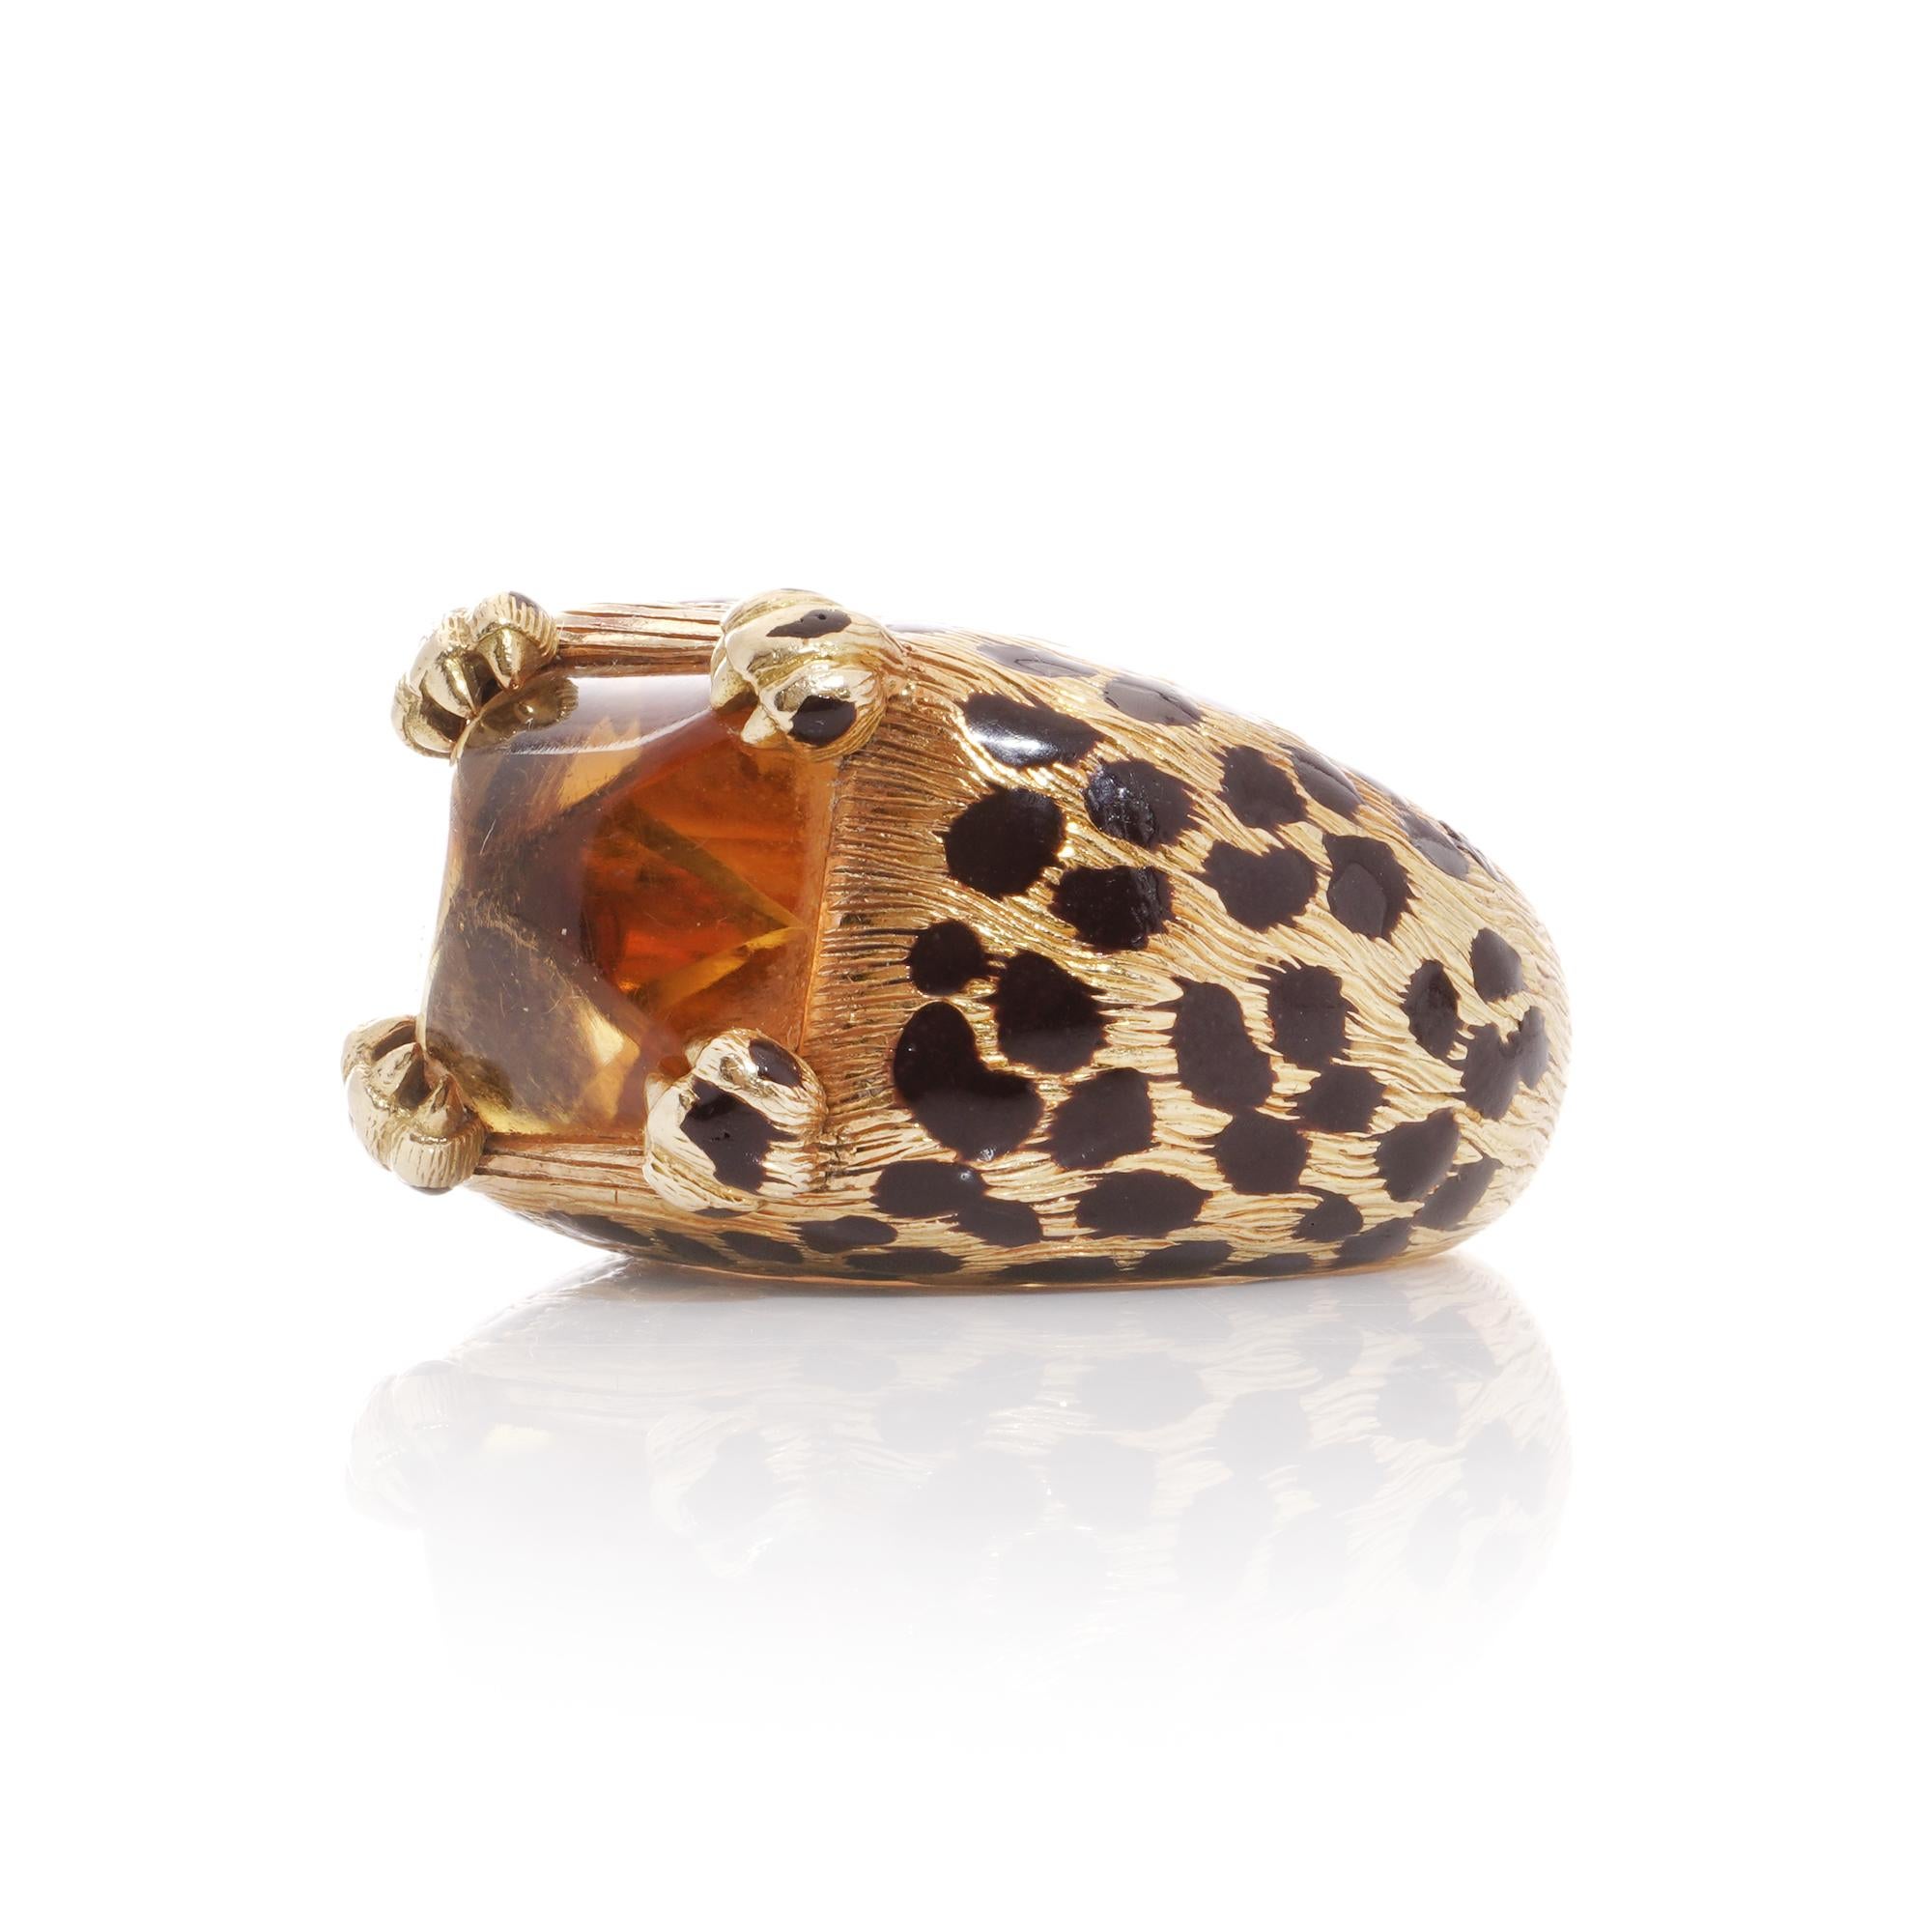 Indulge in the fierce elegance of this captivating domed cocktail ring, where luxury meets untamed beauty. At its heart lies a mesmerizing sugarloaf cabochon-cut citrine, cradled by primal leopard paw motif prongs, all embraced by textured 18k